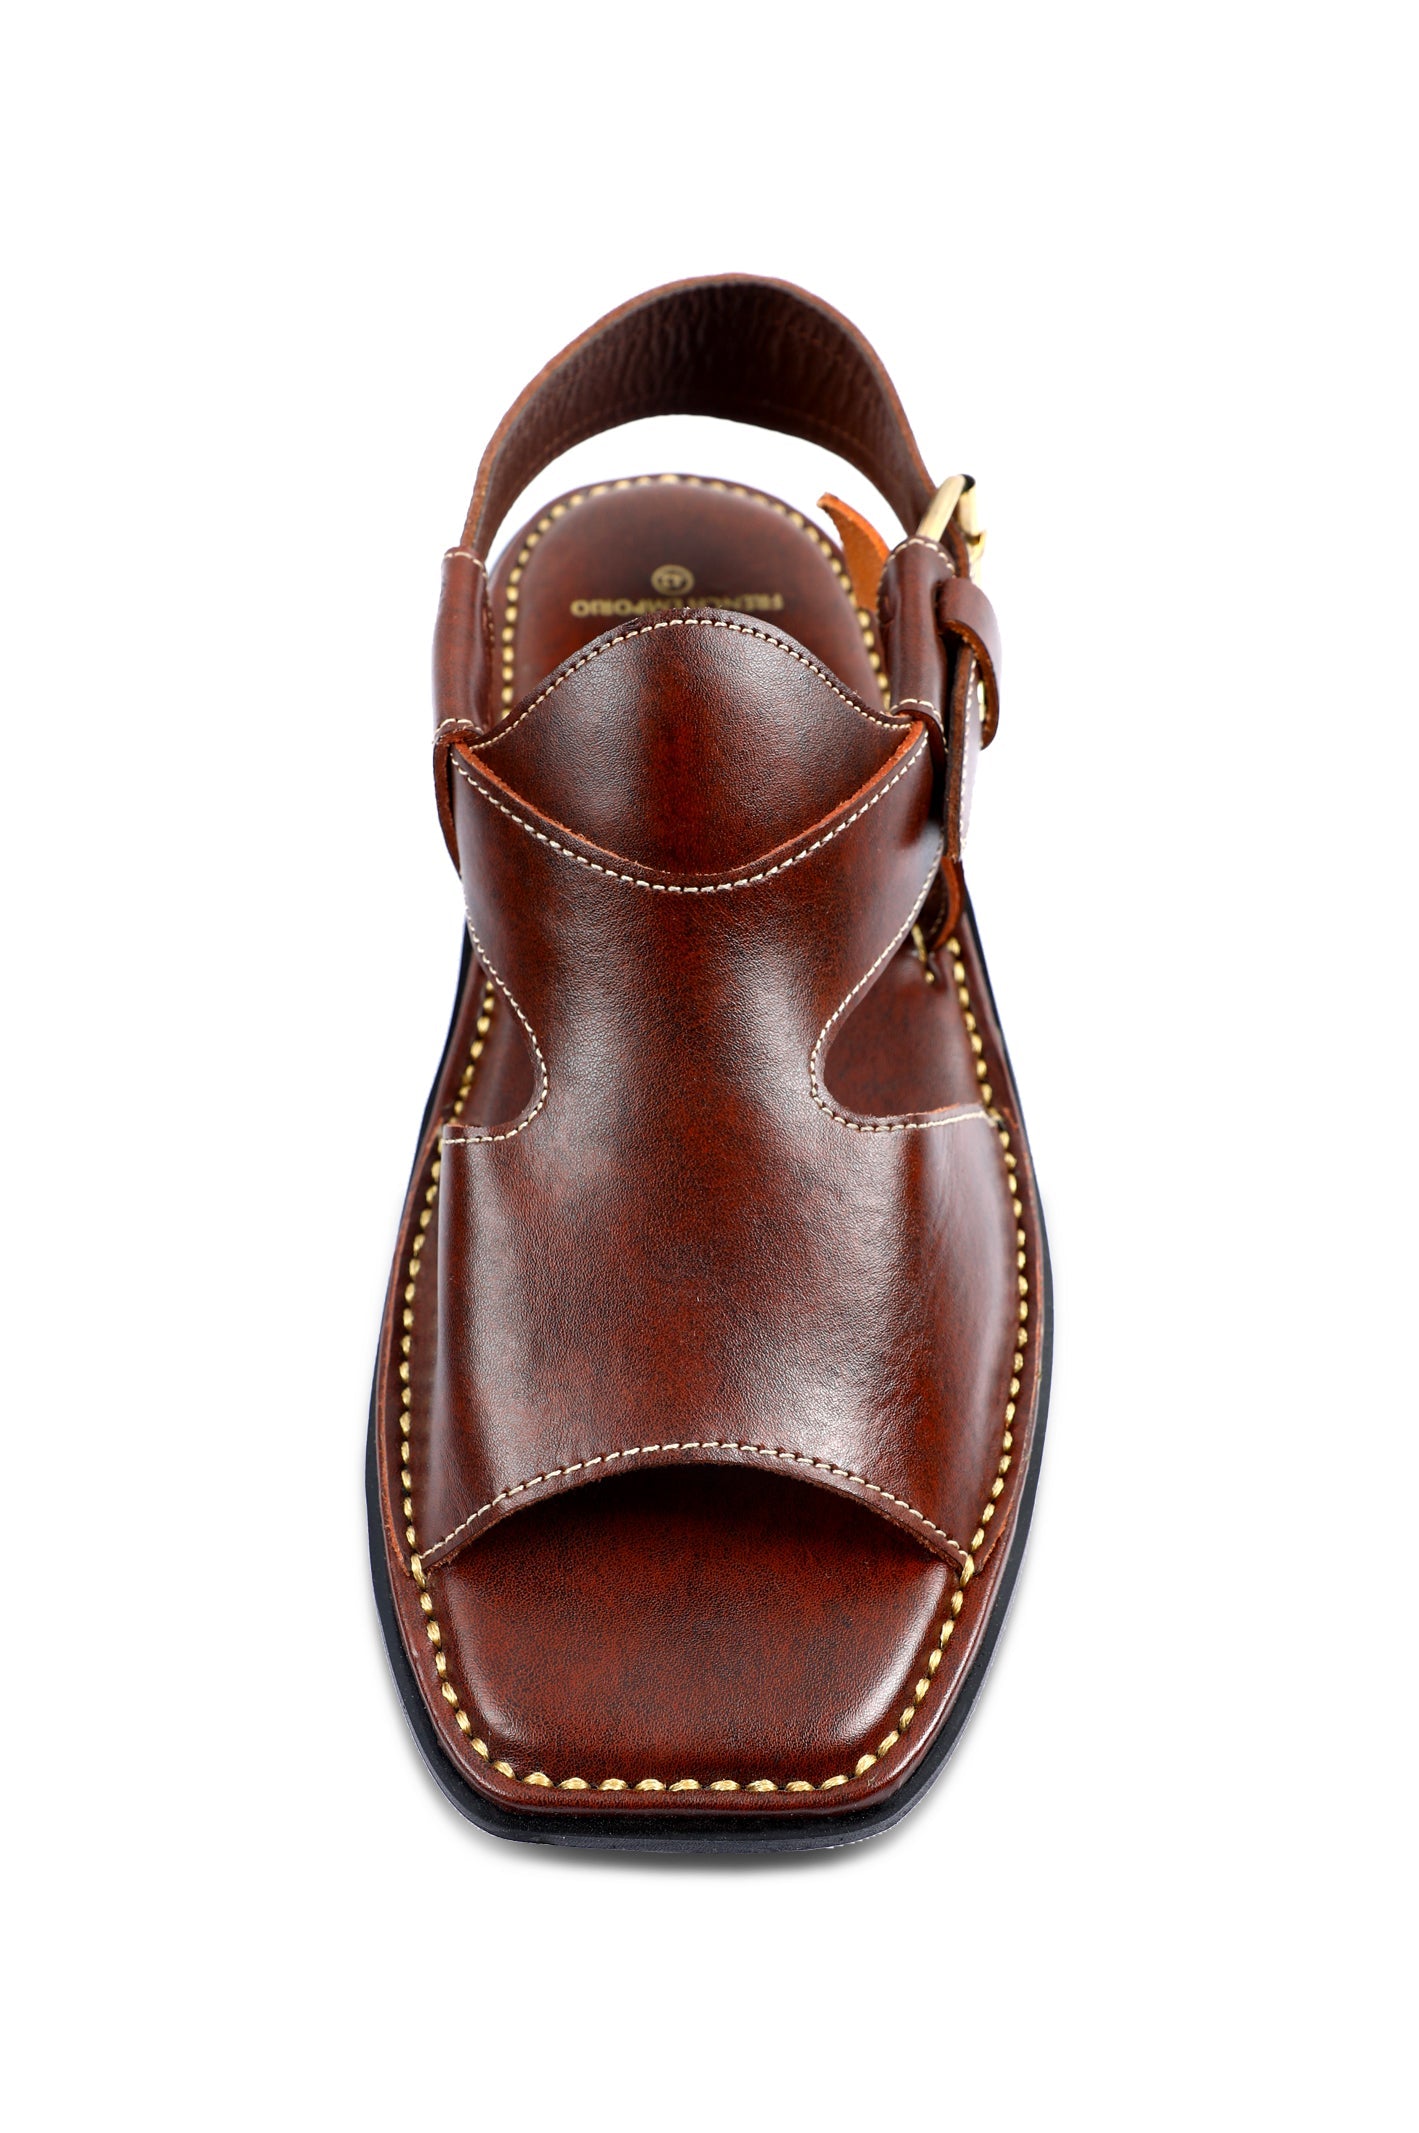 French Emporio Men Sandals SKU: PSLD-0030-BROWN - Diners